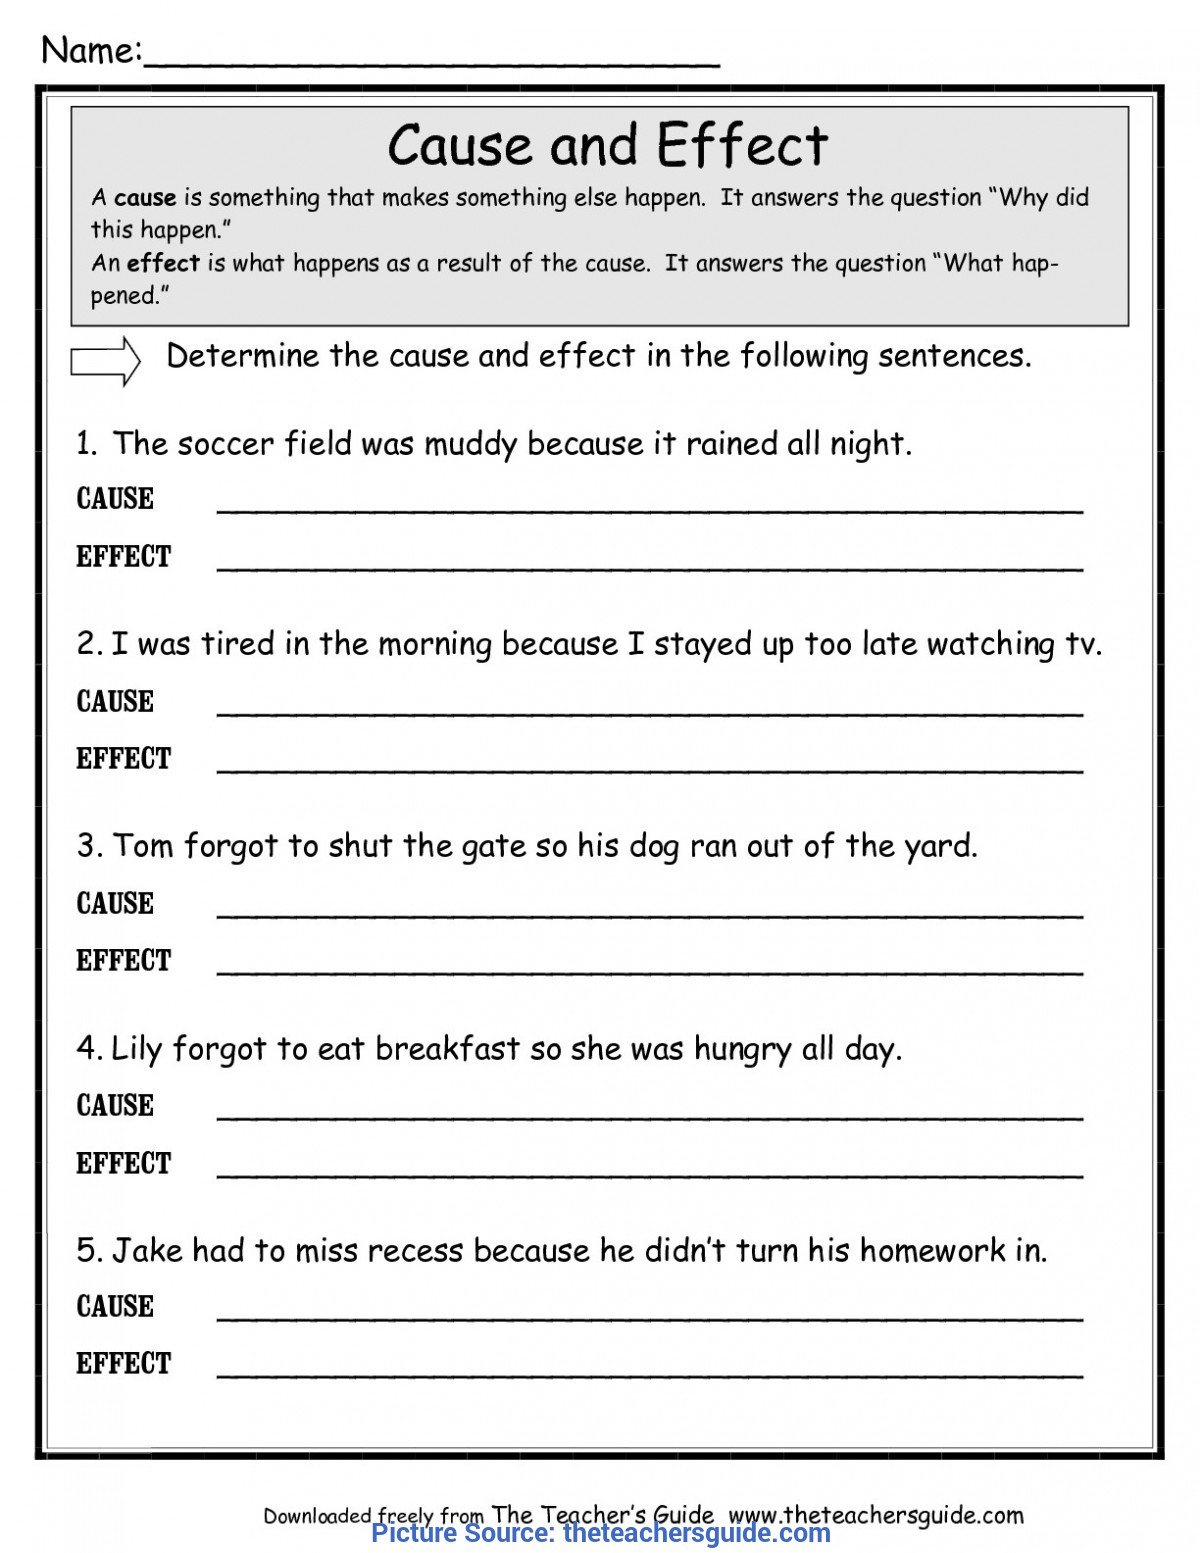 Cause And Effect Worksheets From The Teacher  Ota Tech Together With Cause And Effect Worksheets 3Rd Grade